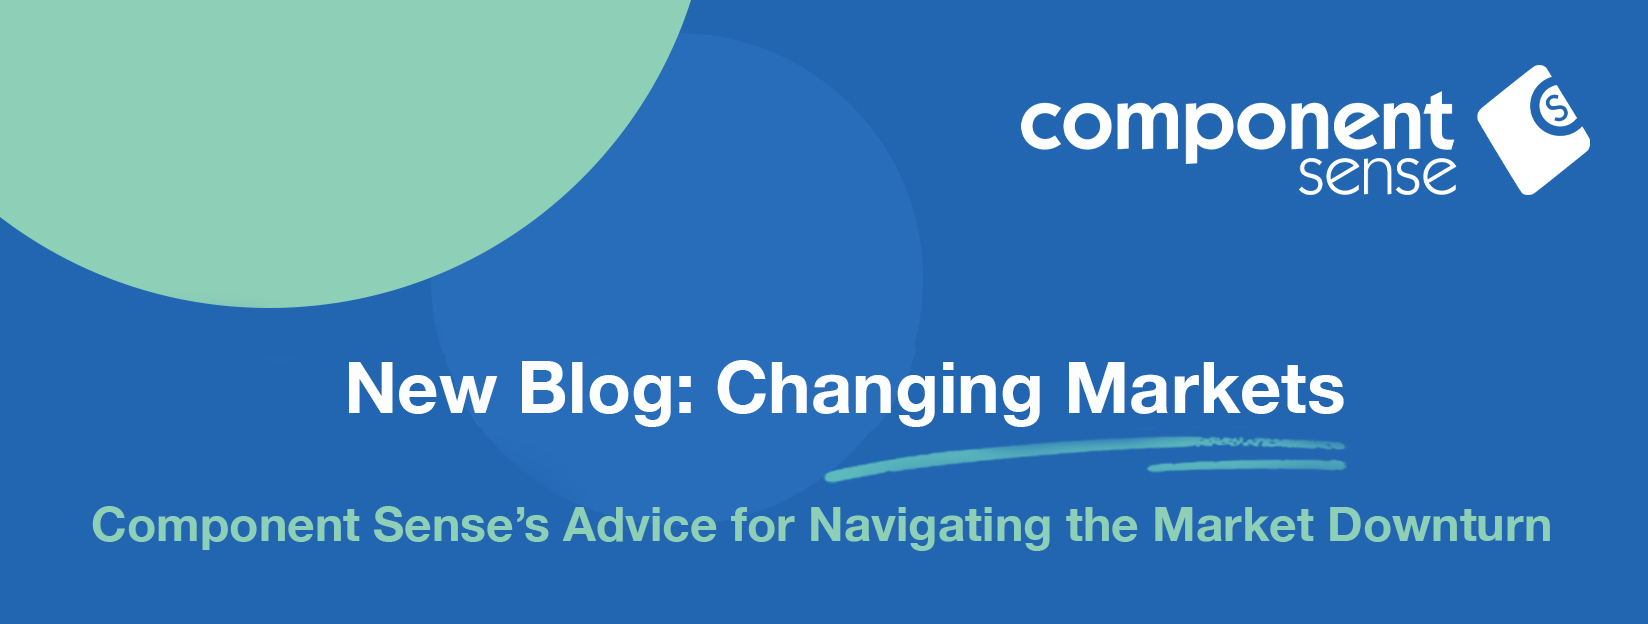 Changing Markets: Component Sense’s Advice for Navigating the Coming Market Downturn